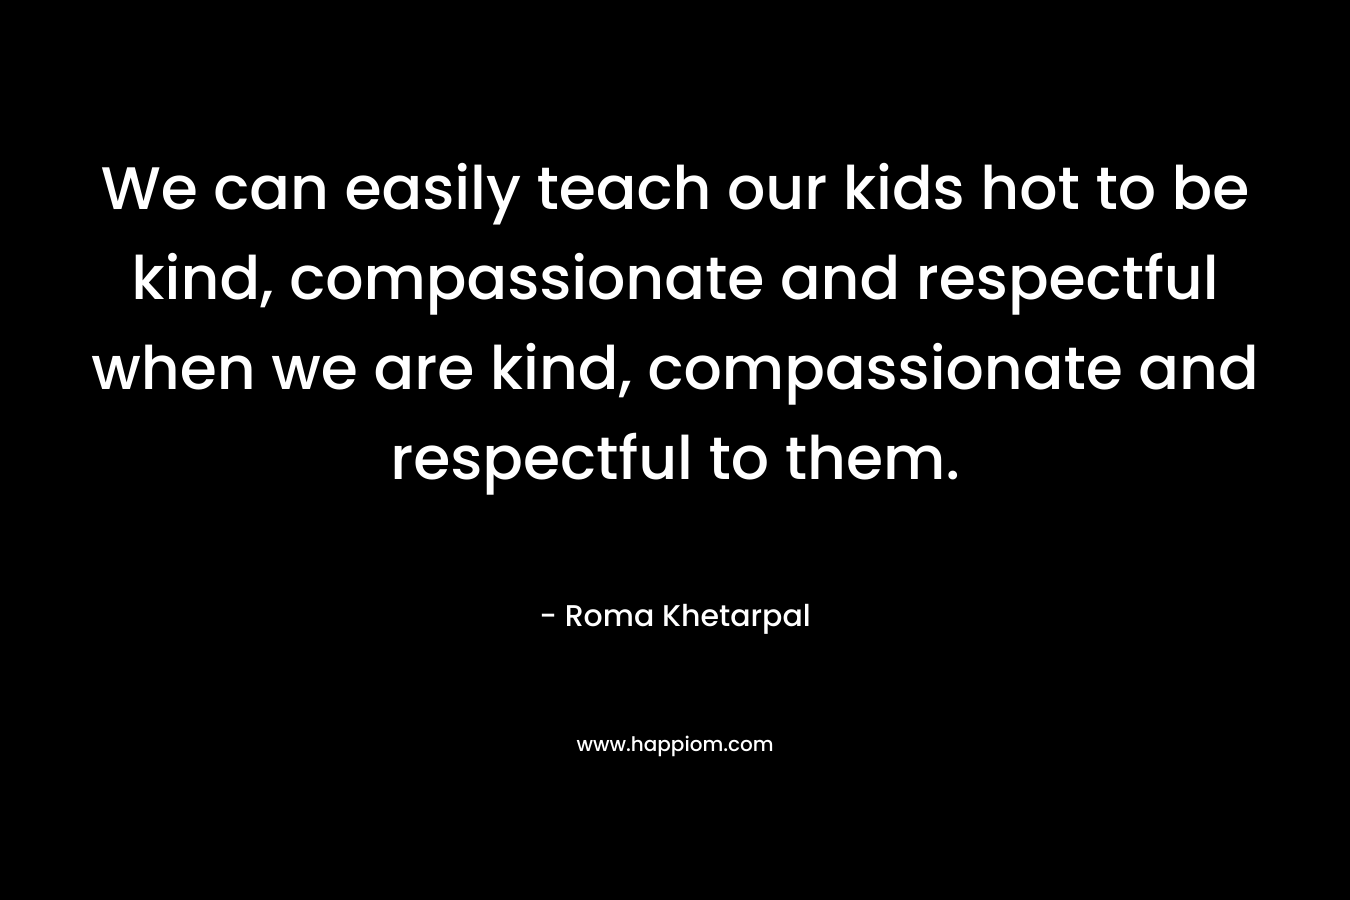 We can easily teach our kids hot to be kind, compassionate and respectful when we are kind, compassionate and respectful to them. – Roma Khetarpal